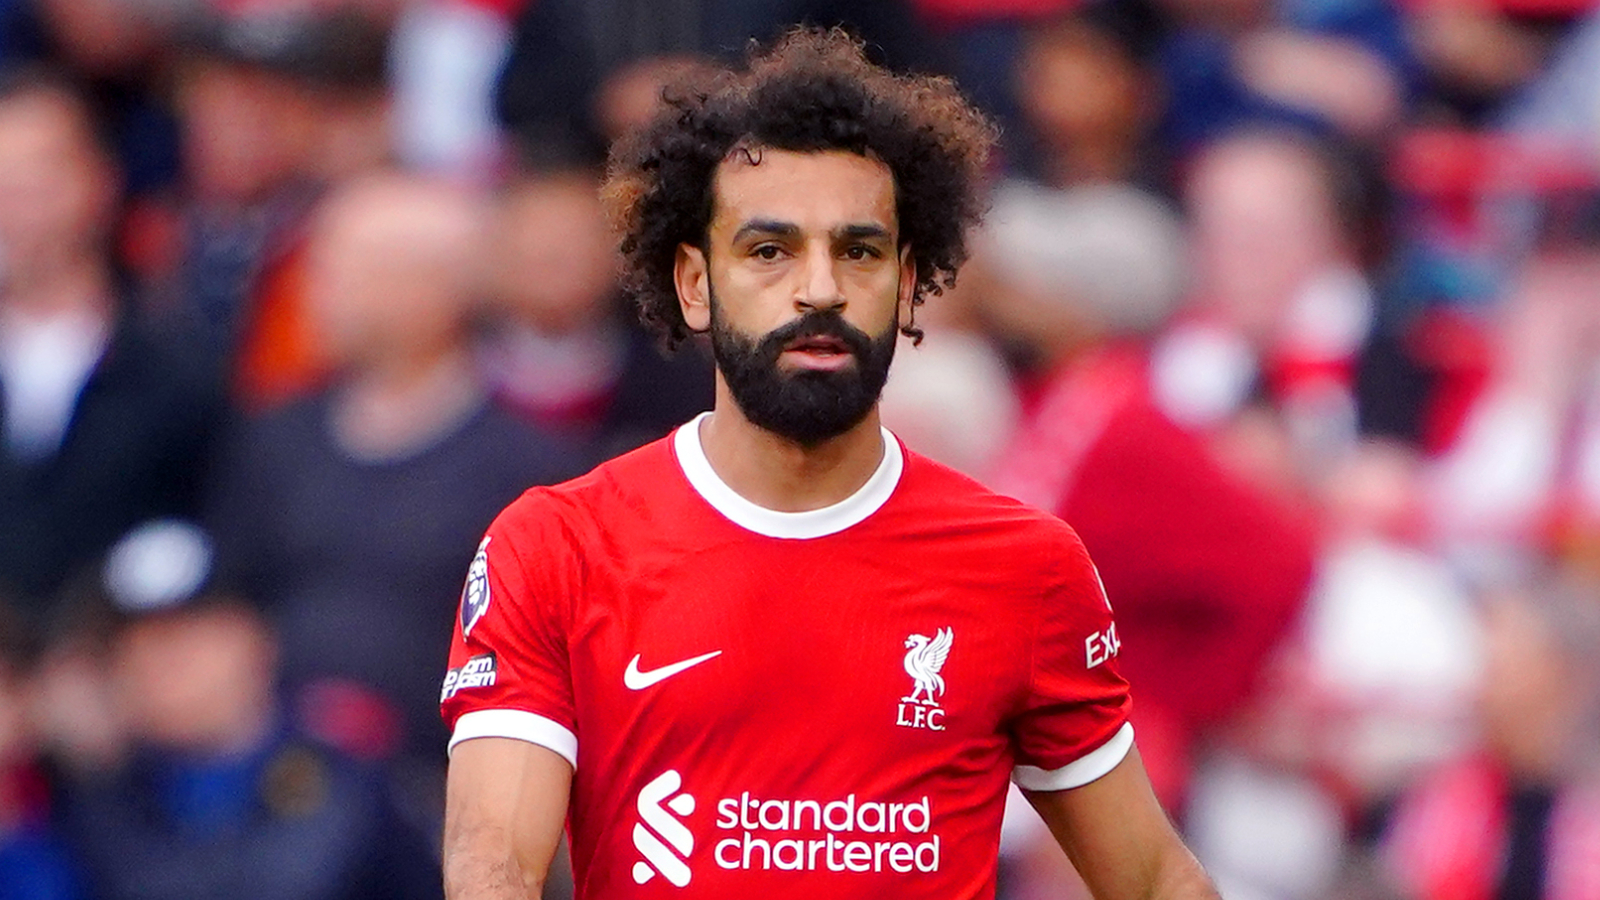 Mohamed Salah, a Liverpool and Egypt footballer, made a significant donation for people affected by Israeli air raids in Gaza.